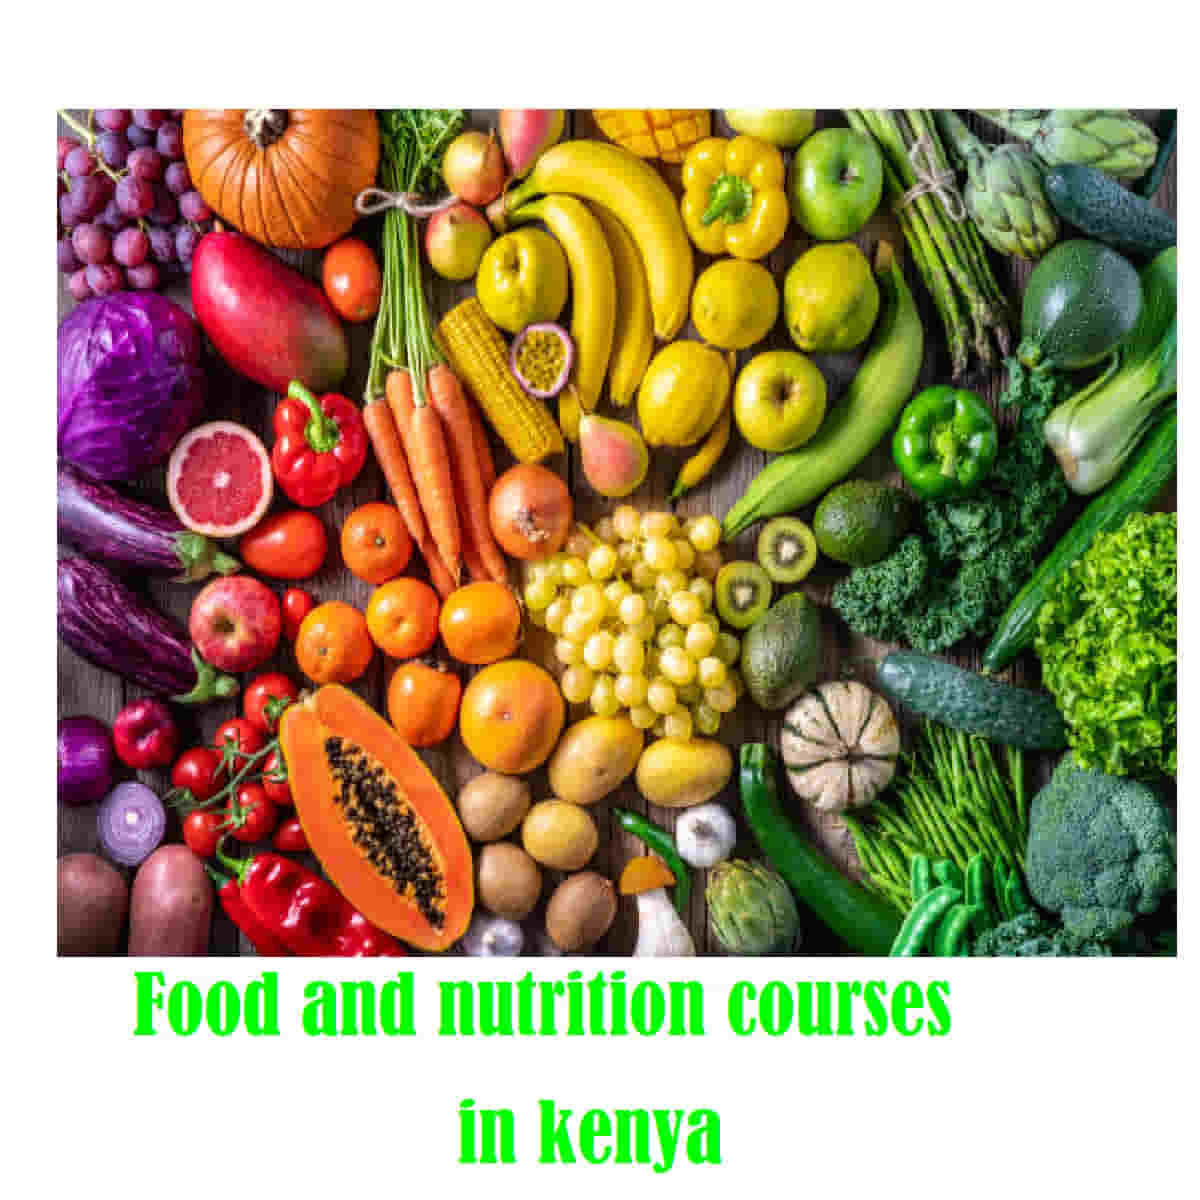 Food and nutrition courses in Kenya